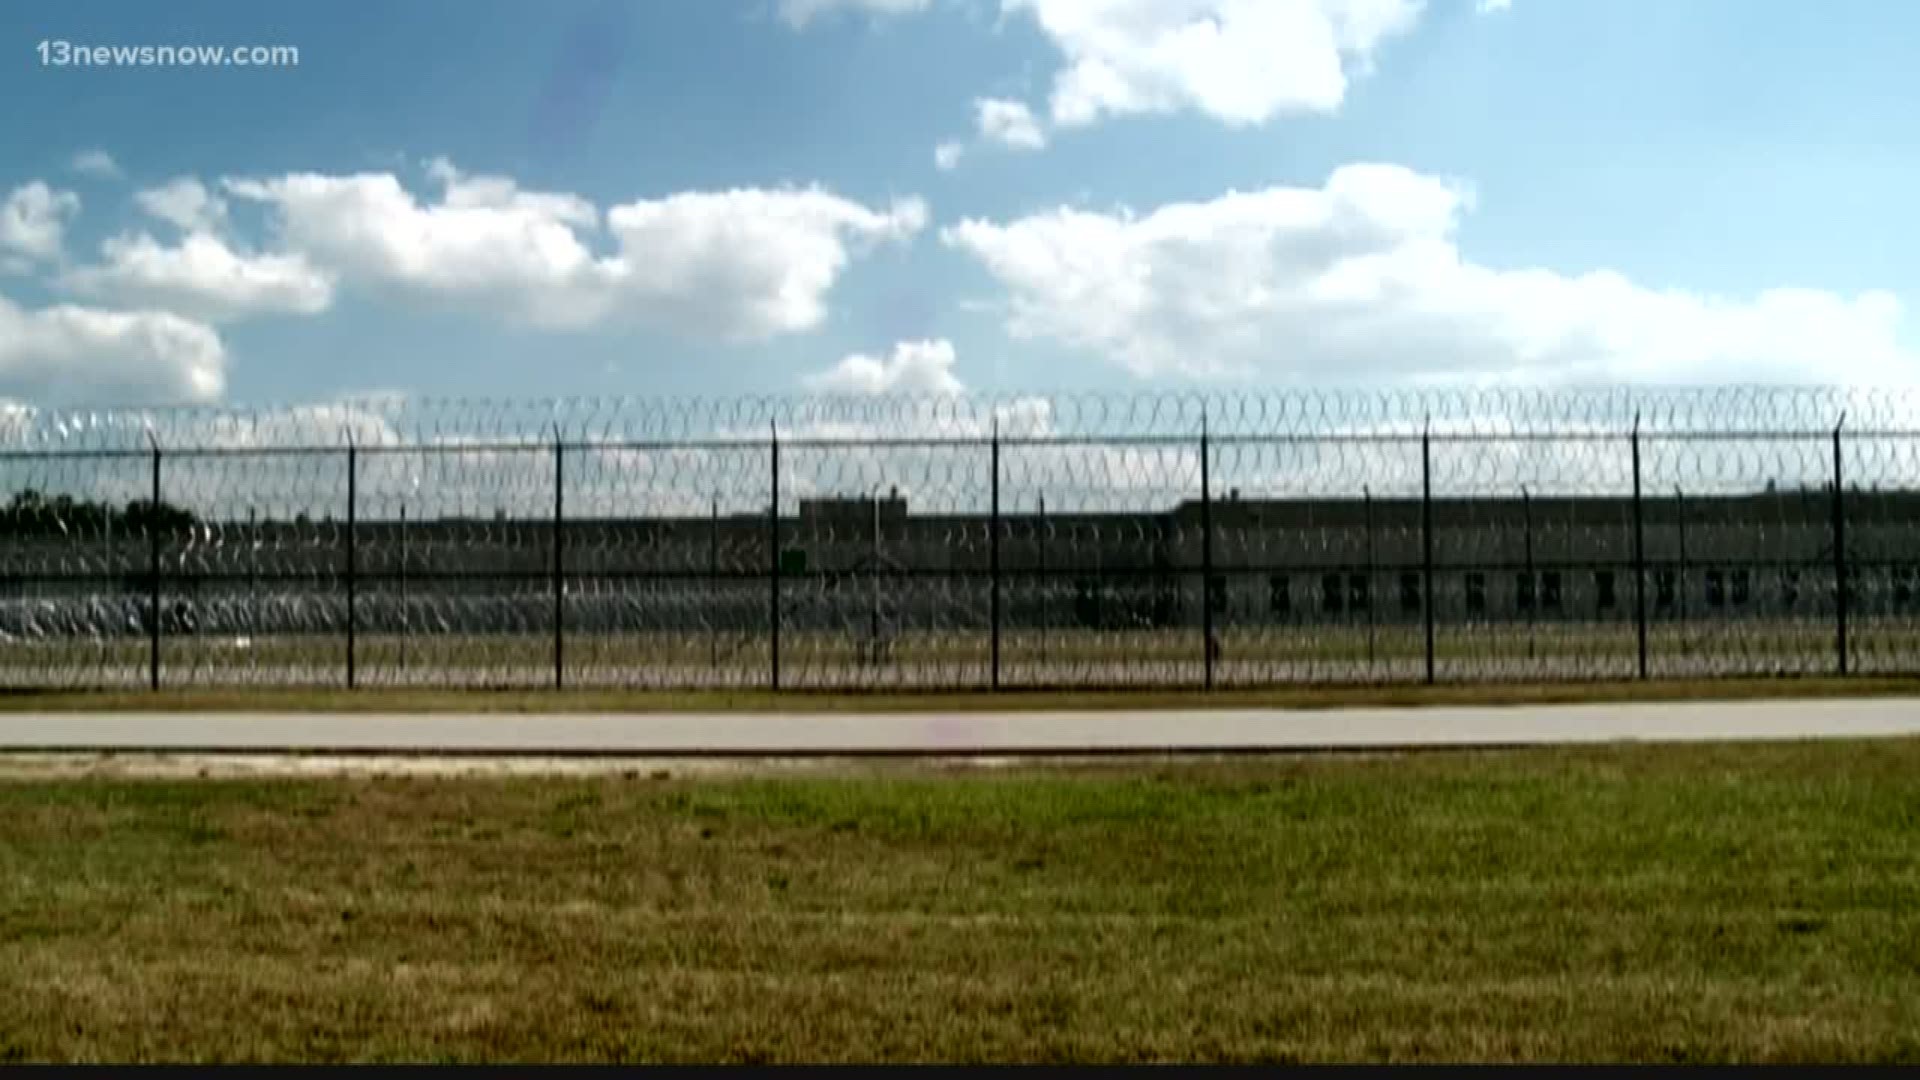 Right now, prisons across the country are on edge as inmates begin a strike.